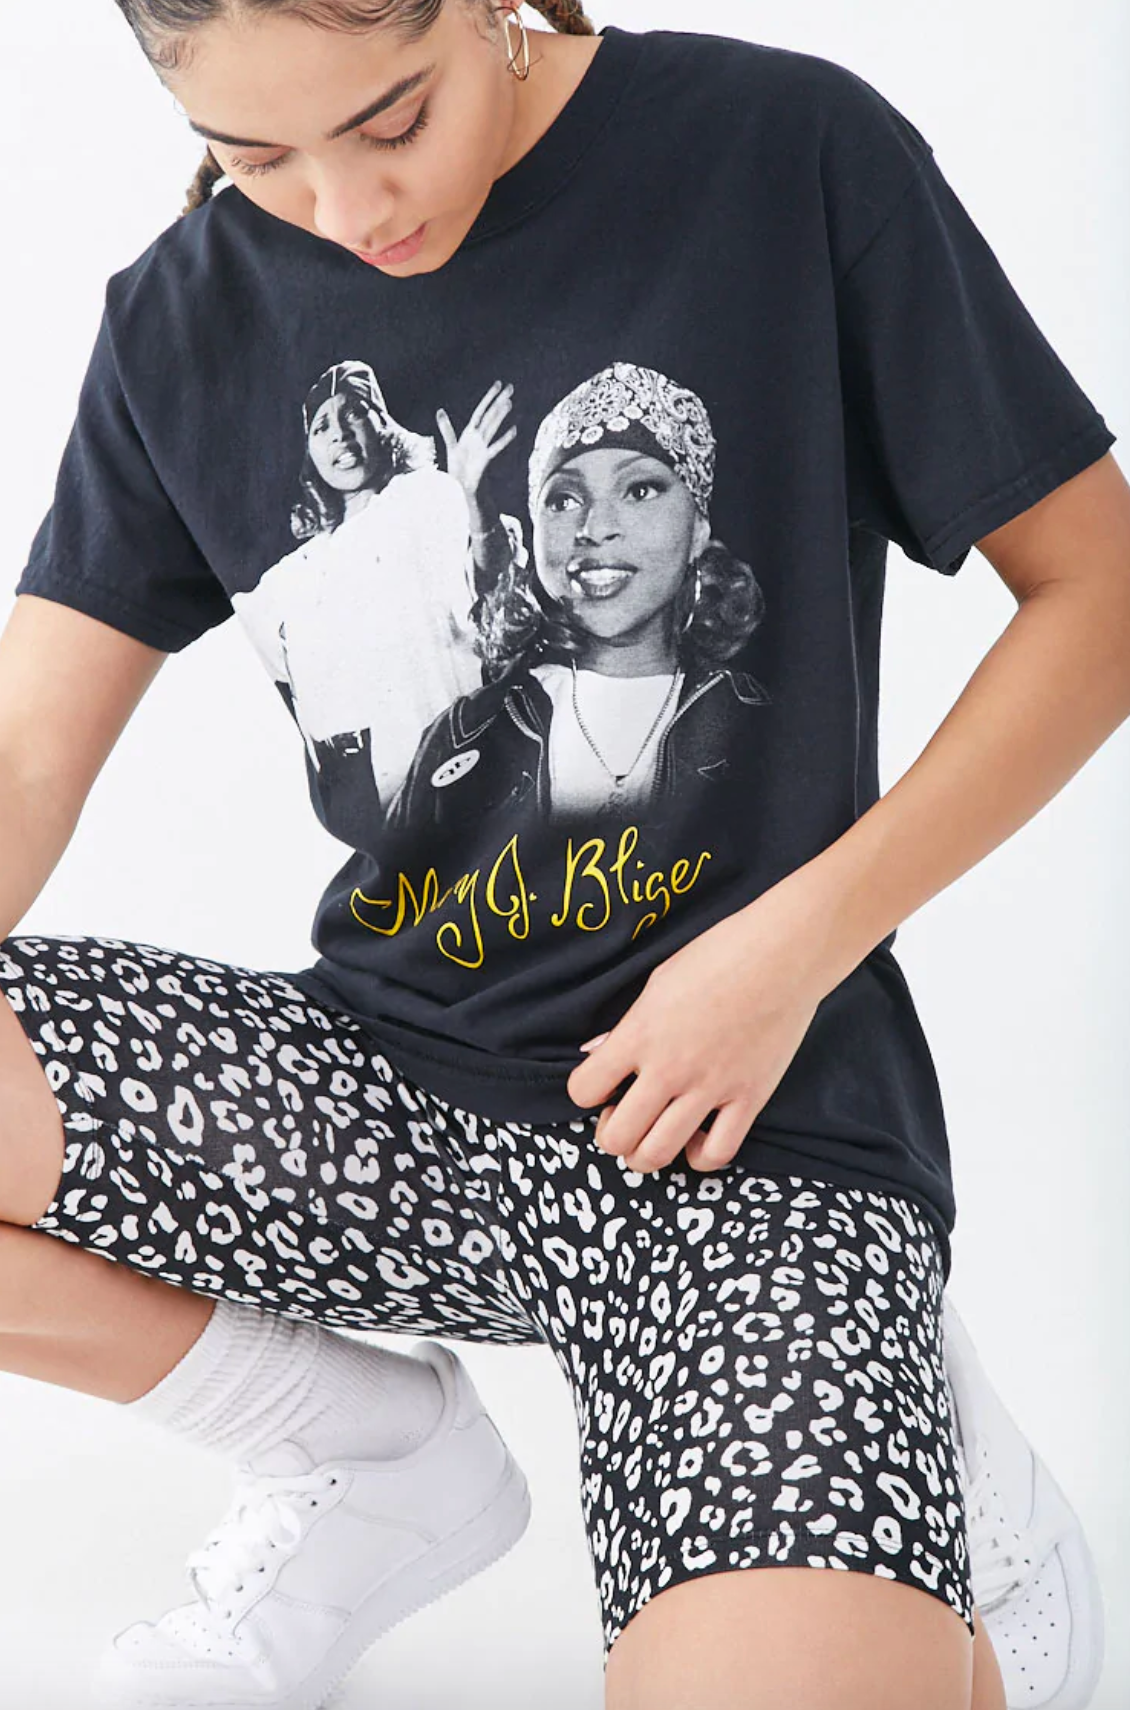 Go Mary, It’s Your Birthday! Celebrate Mary J. Blige With These Dope Products